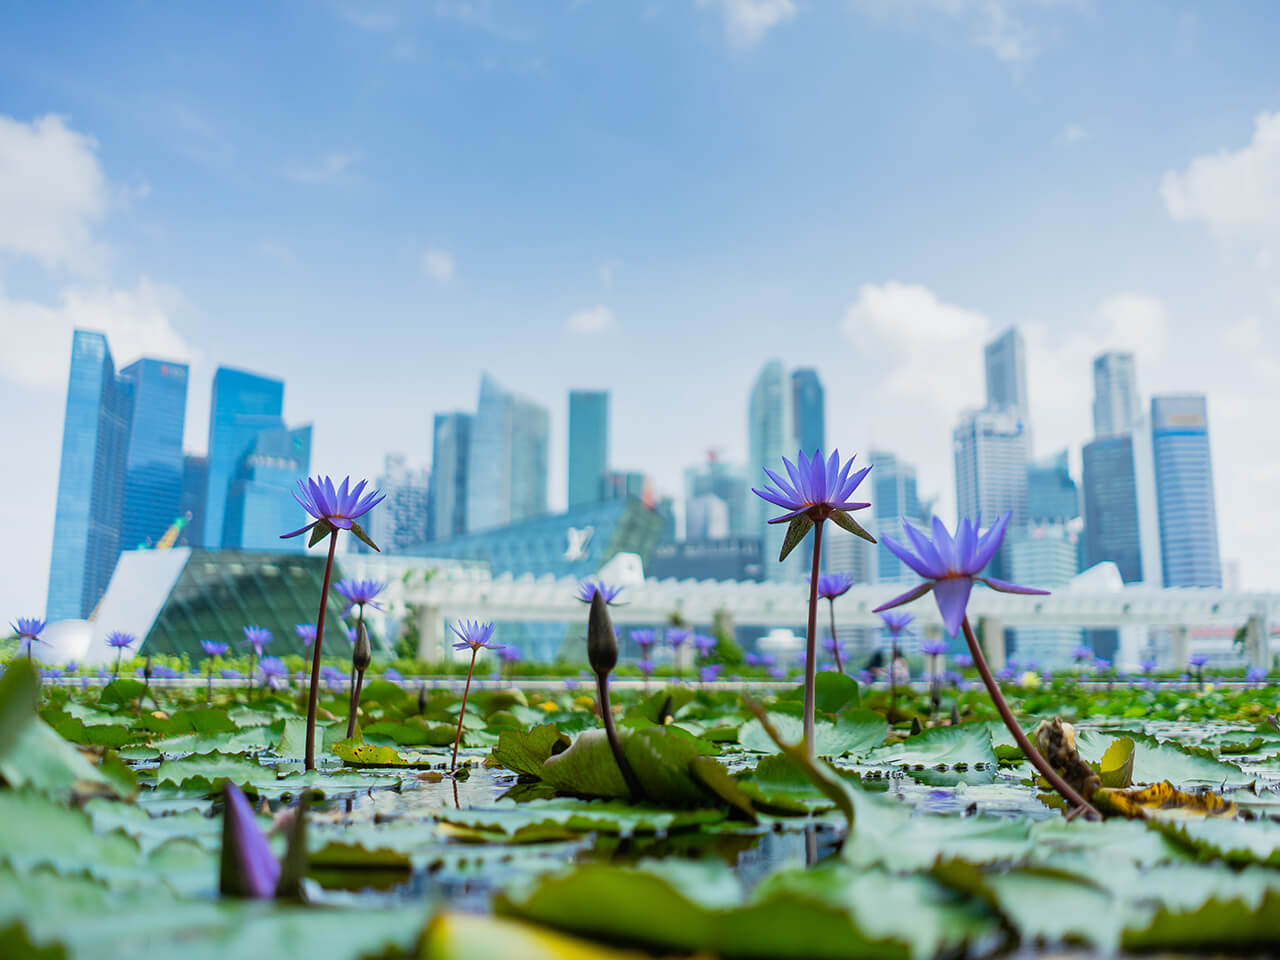 8 things you need to know before visiting Singapore